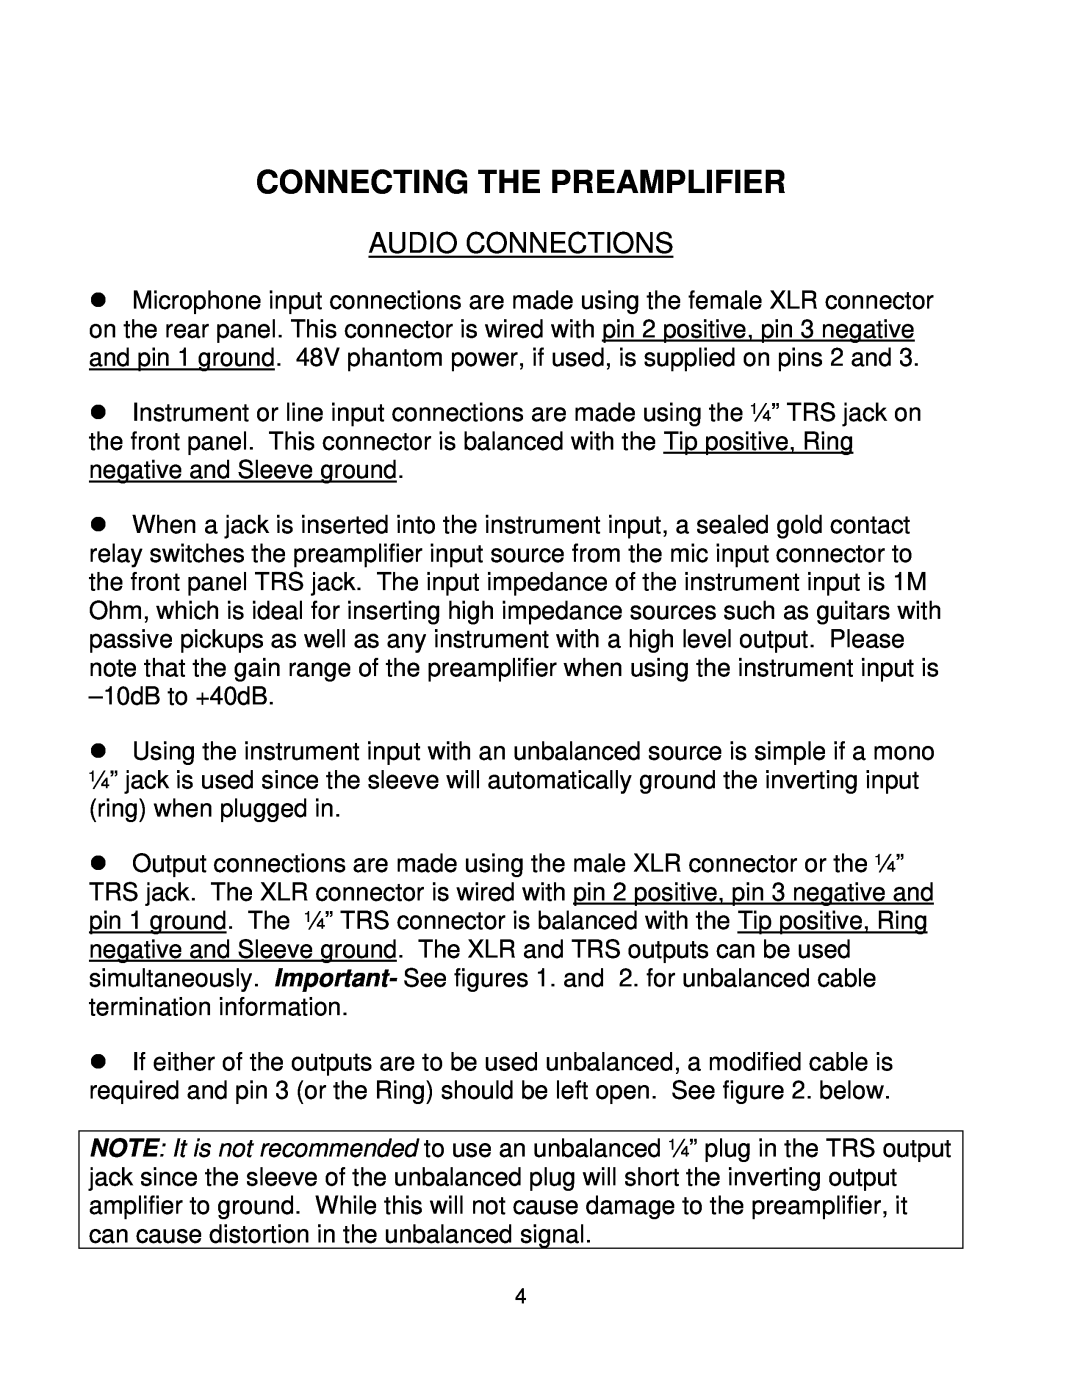 Boulder Amplifiers 101 owner manual Connecting The Preamplifier, Audio Connections 